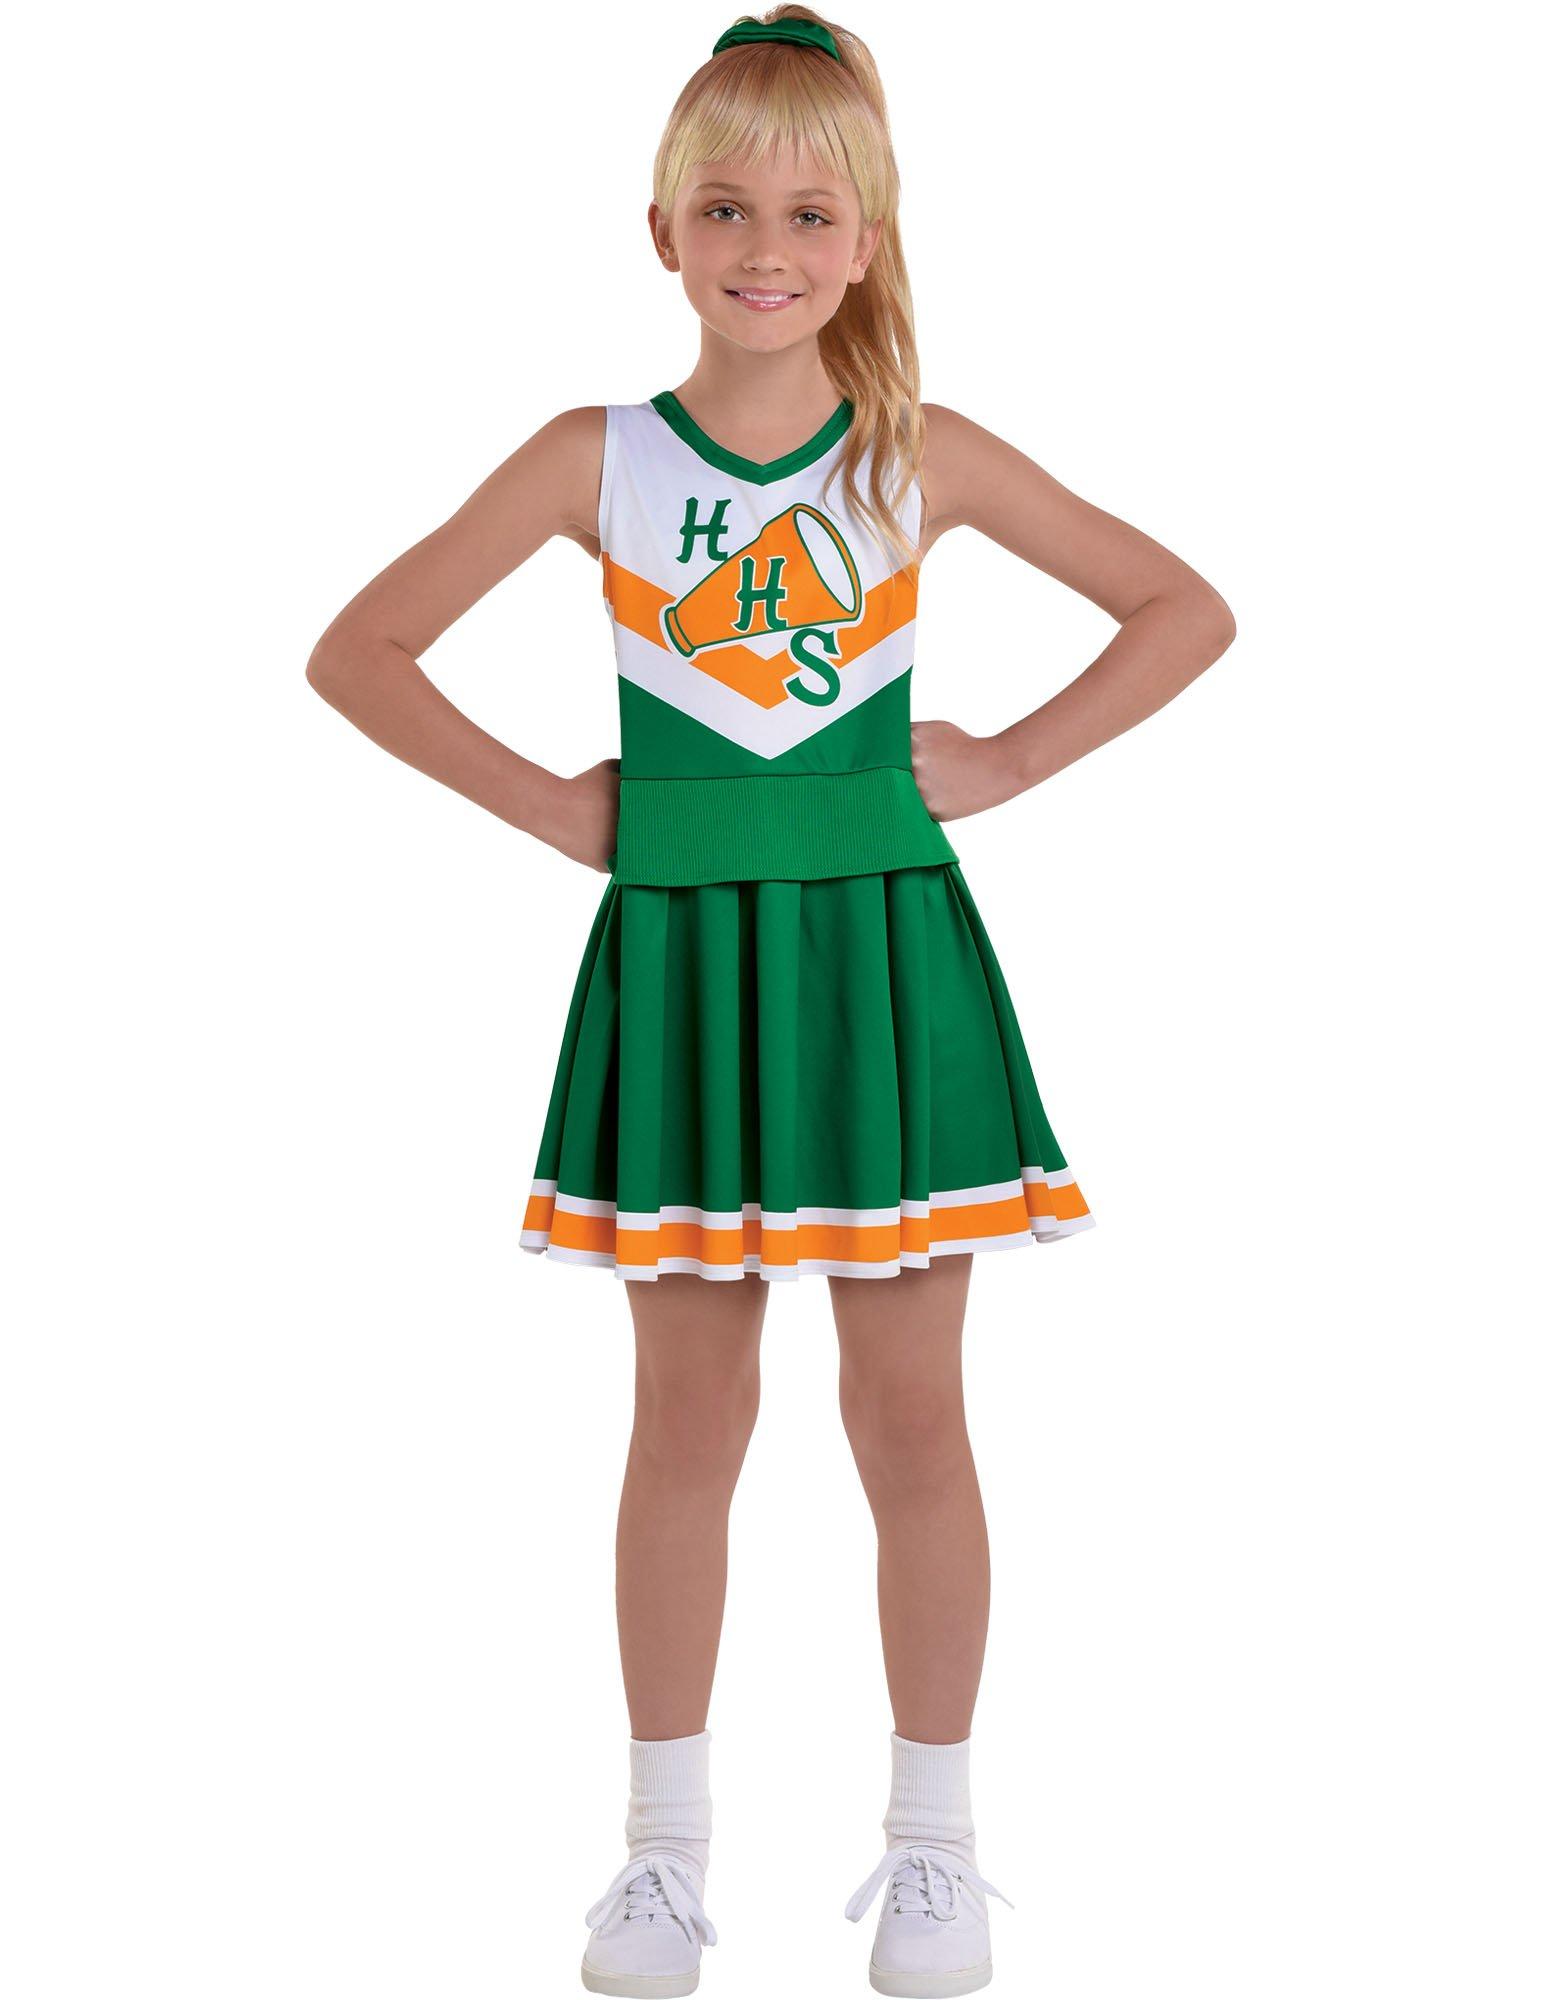 Cheerleader costume for kids. The coolest